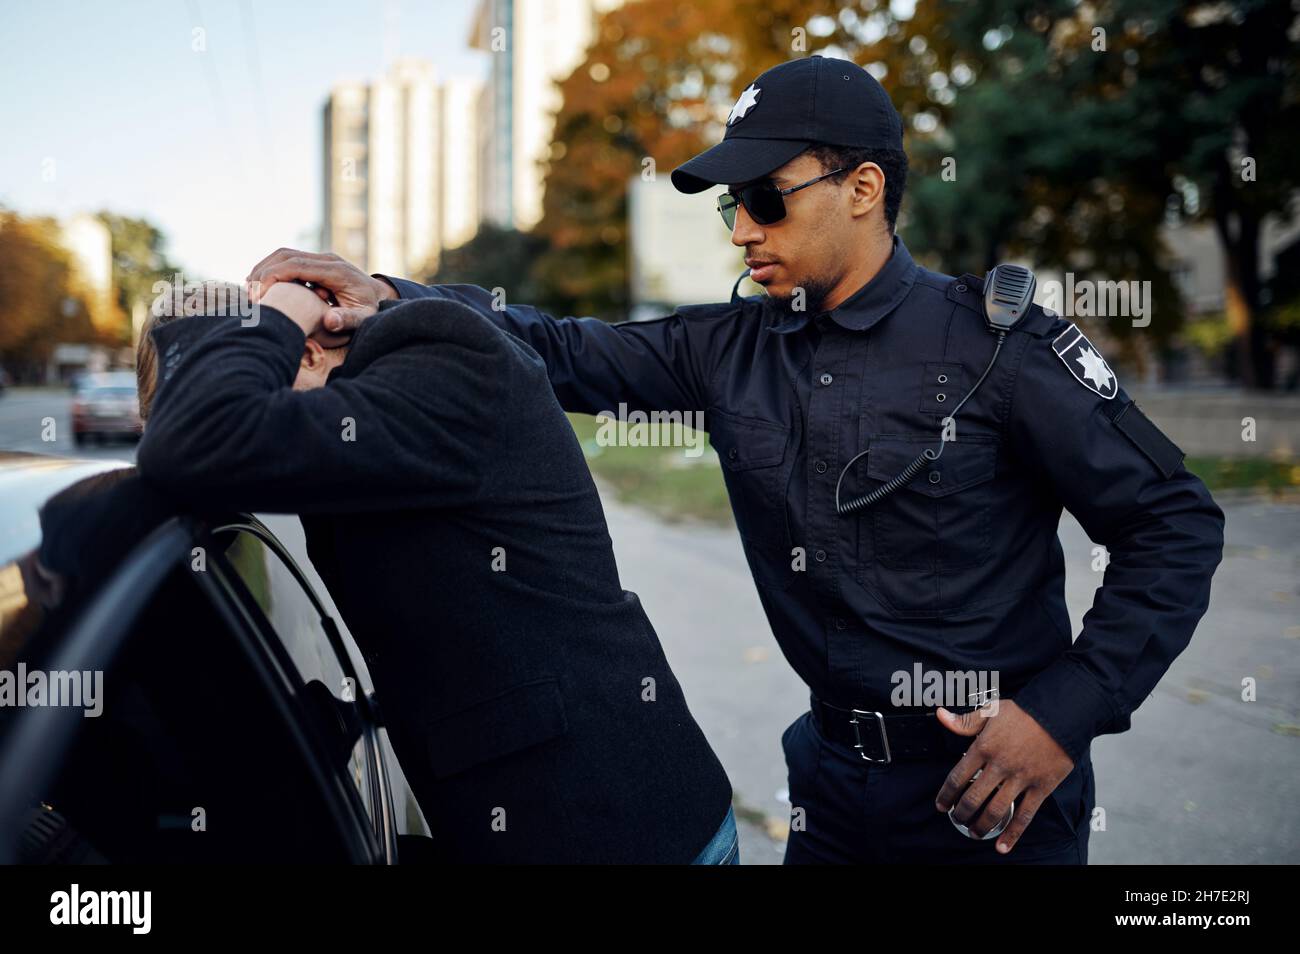 Police patrol arrests male driver near the car Stock Photo